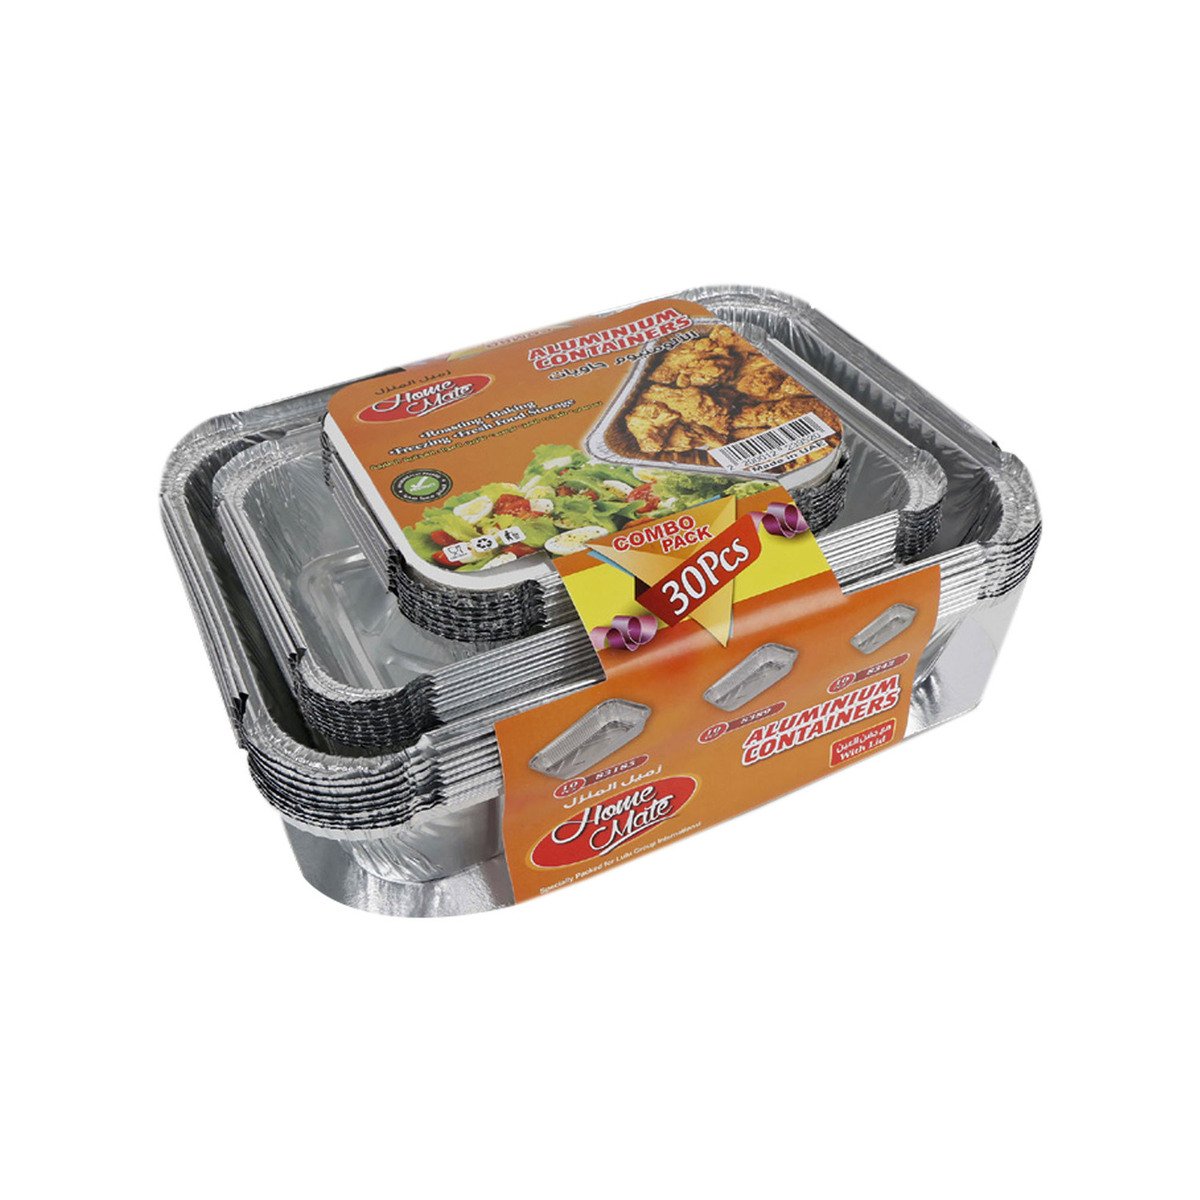 Home Mate Aluminium Containers With Lid Combo Pack 30 pcs